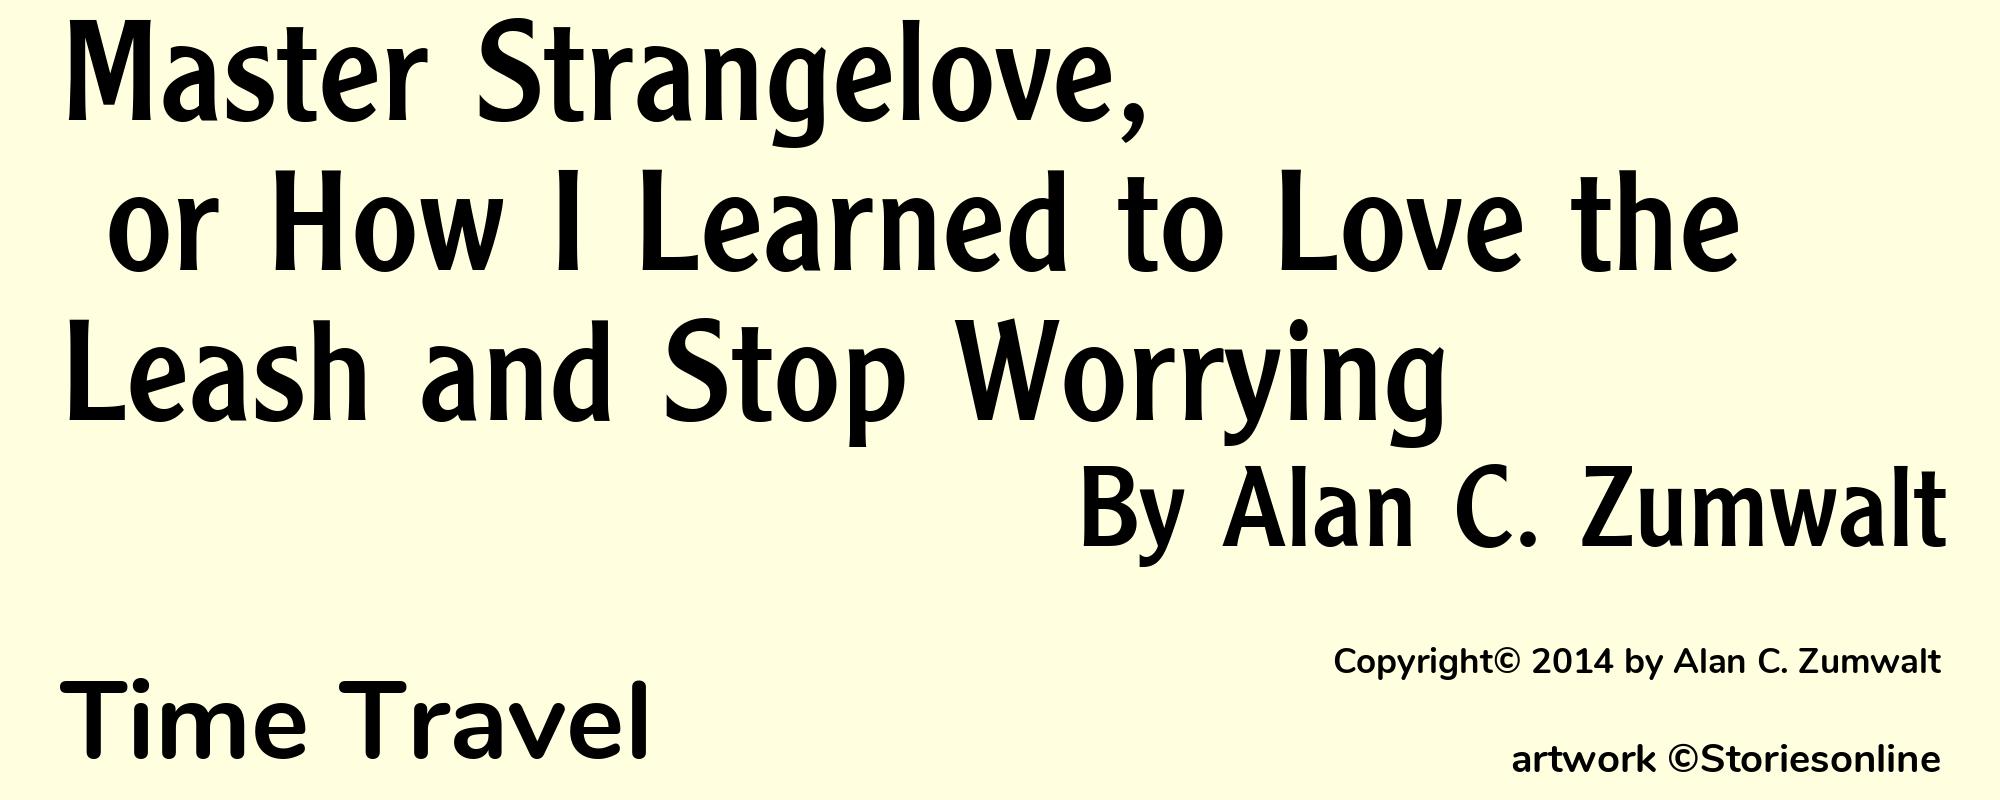 Master Strangelove, or How I Learned to Love the Leash and Stop Worrying - Cover